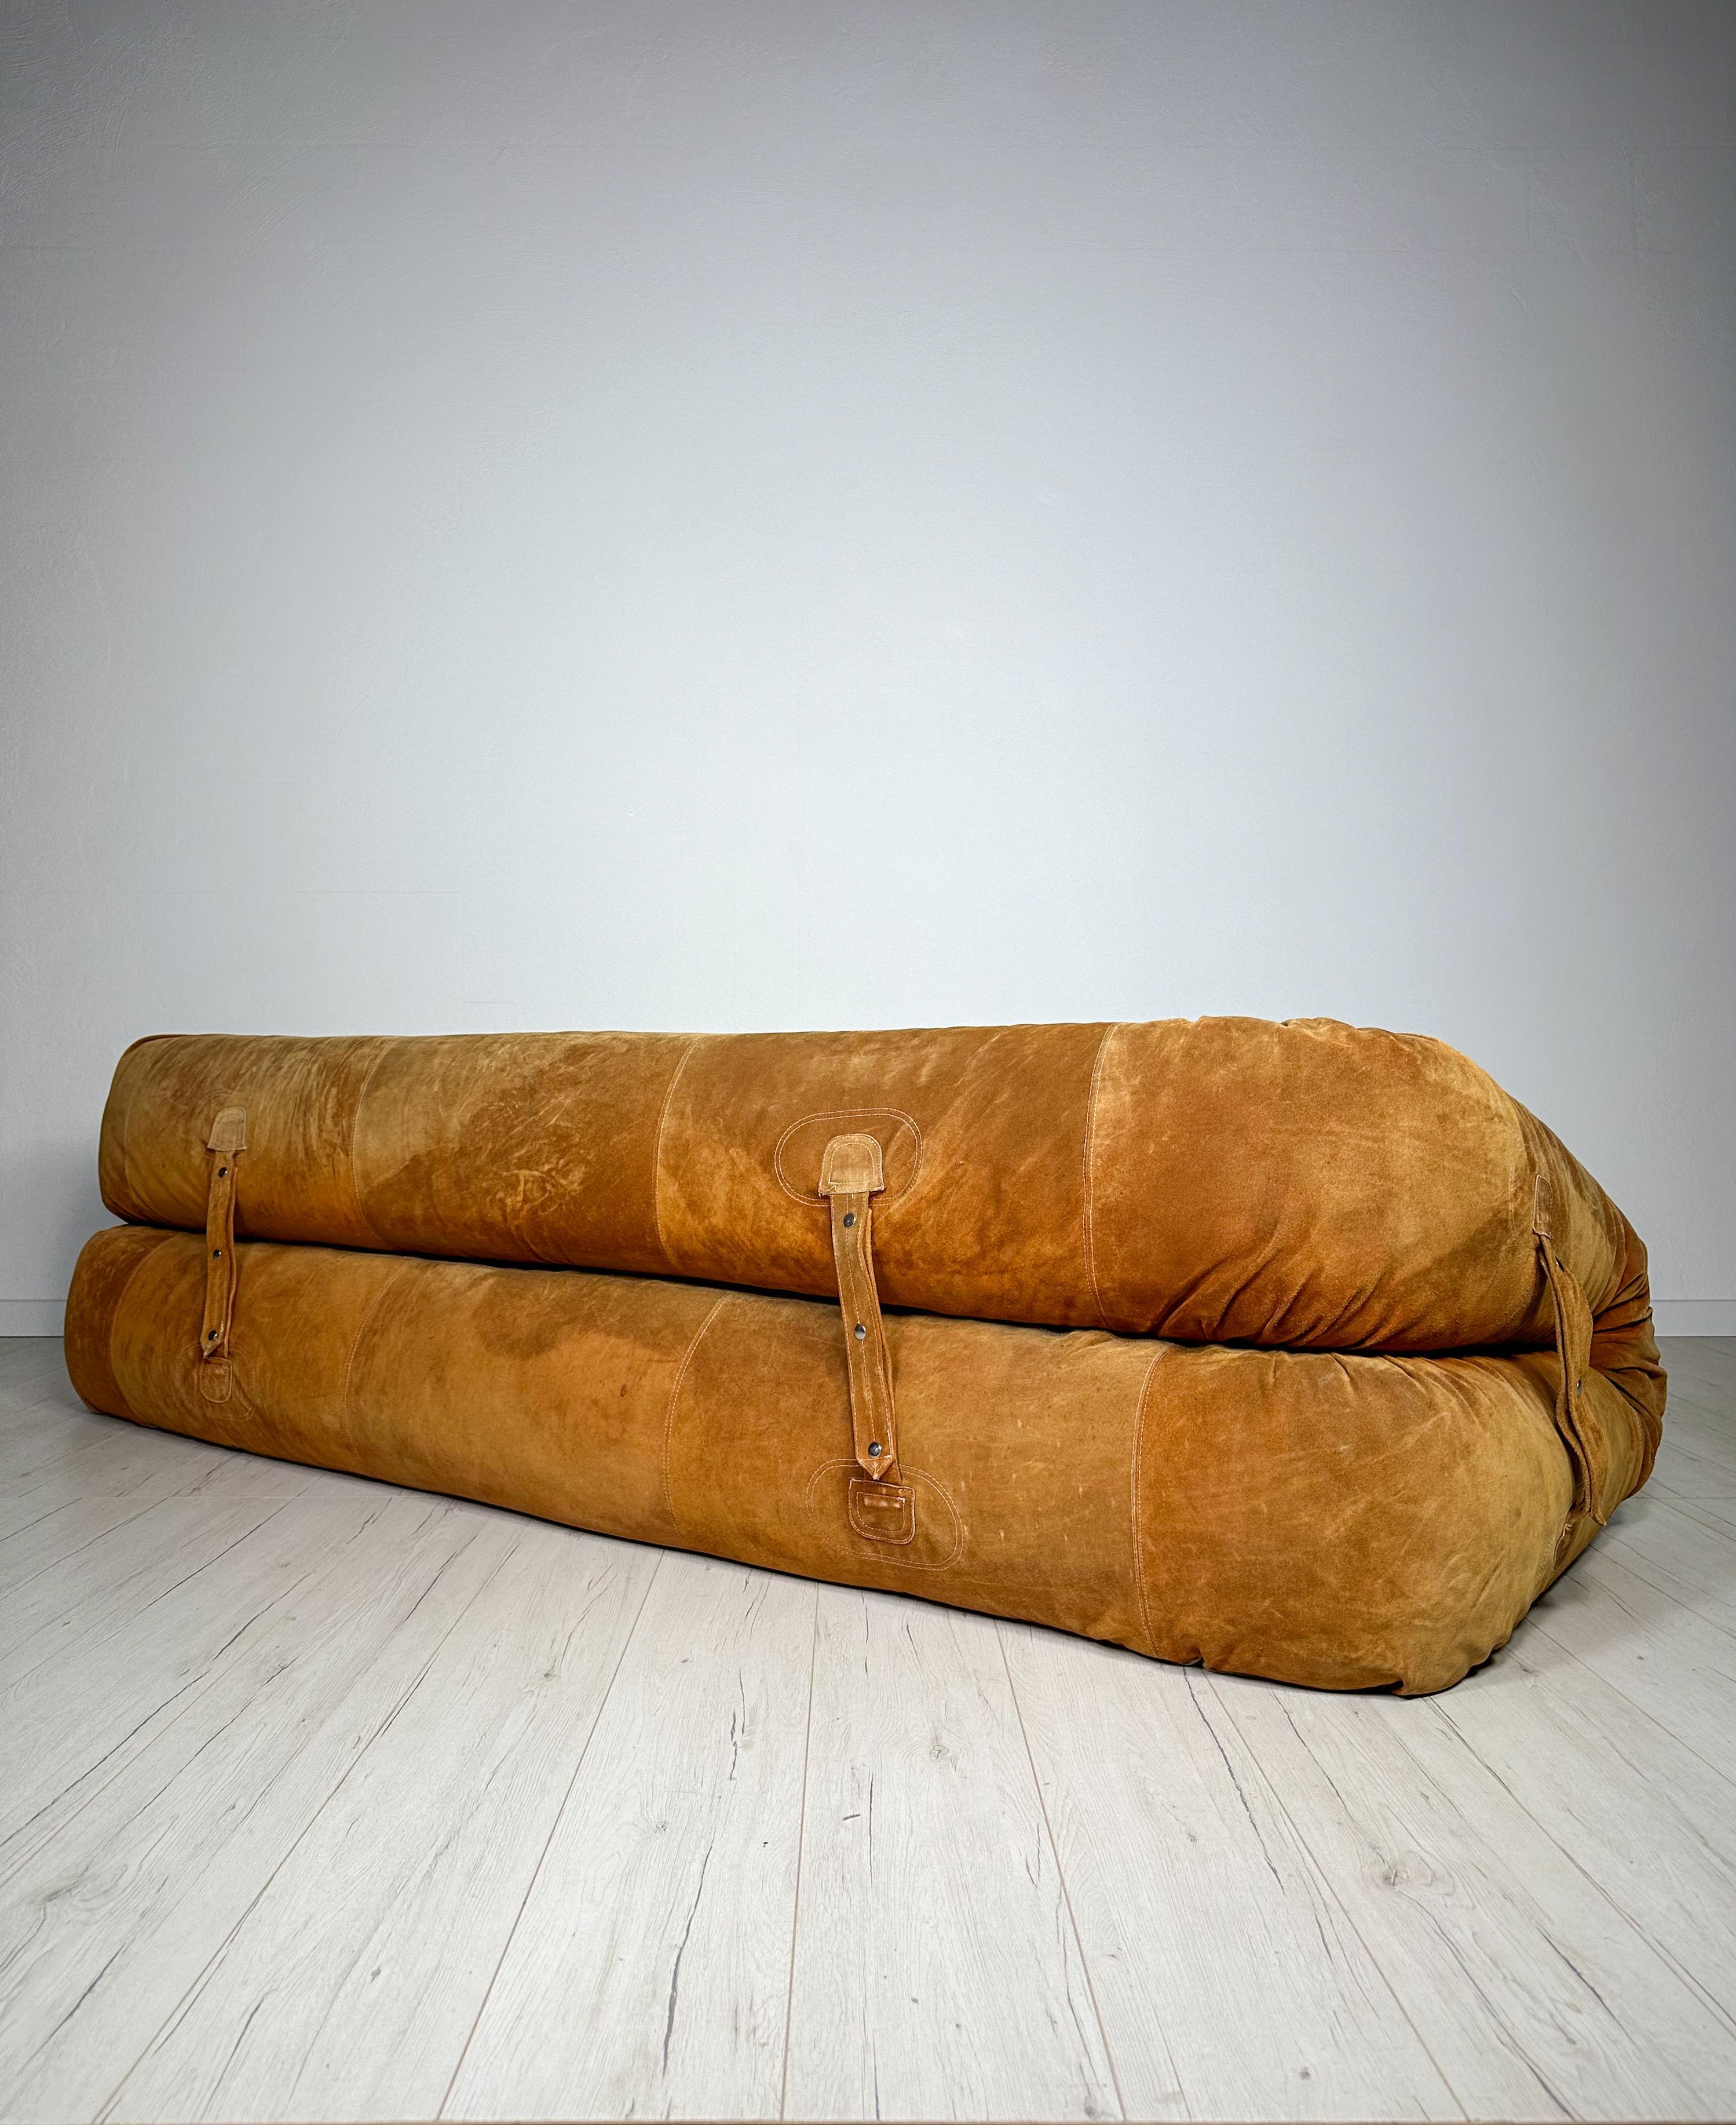 Vintage Suede 3-Seater Anfibio Sofa Bed by Alessandro Becchi for Giovannetti 70s For Sale 4